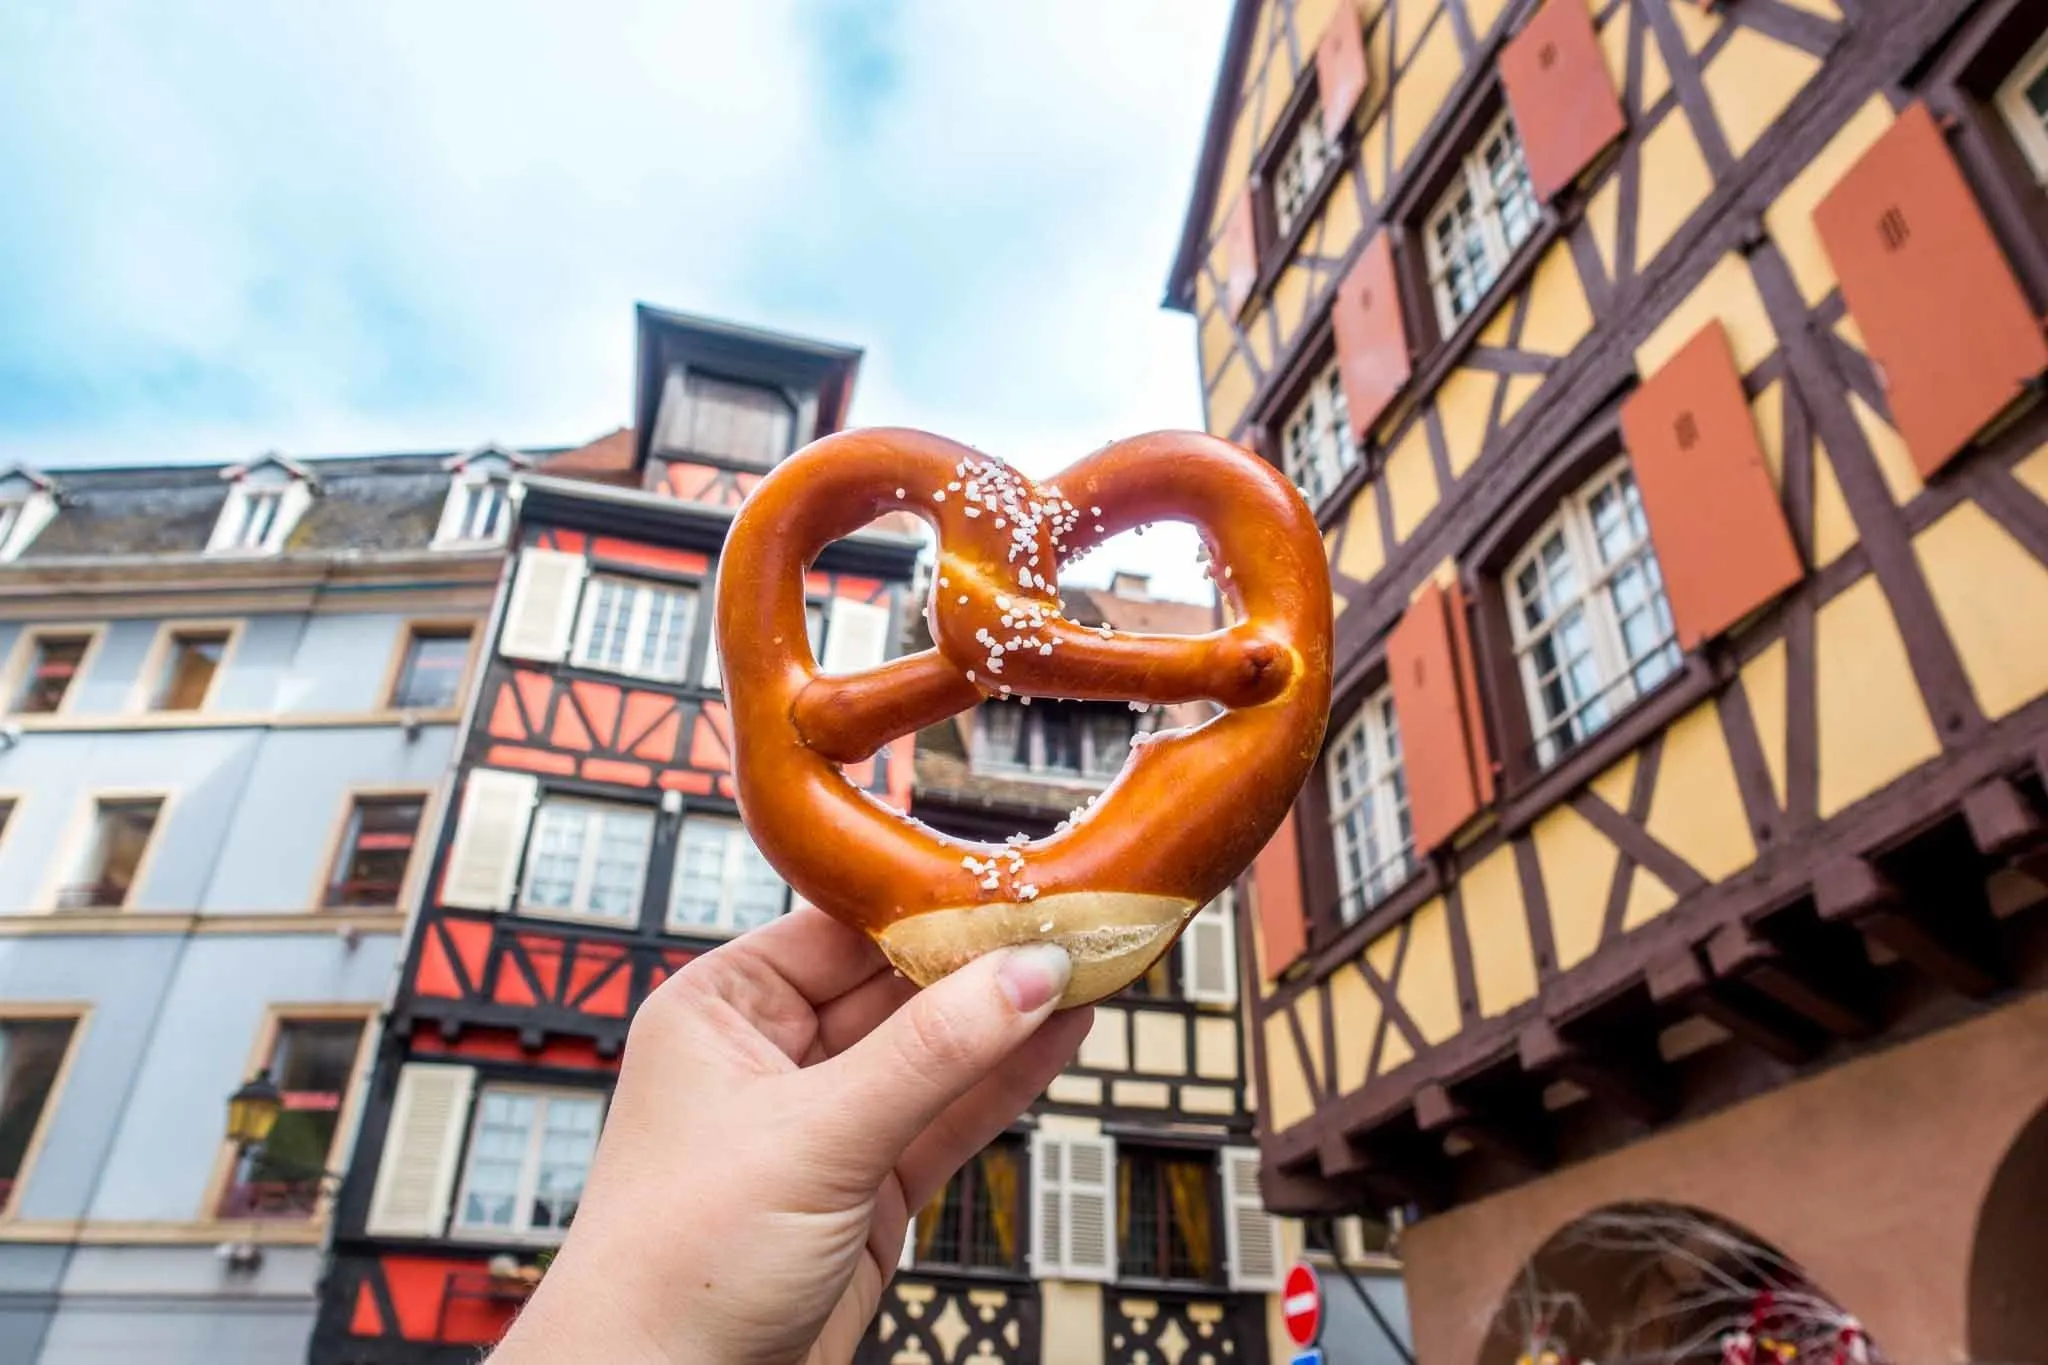 Pretzel in front of traditional Alsace buildings.